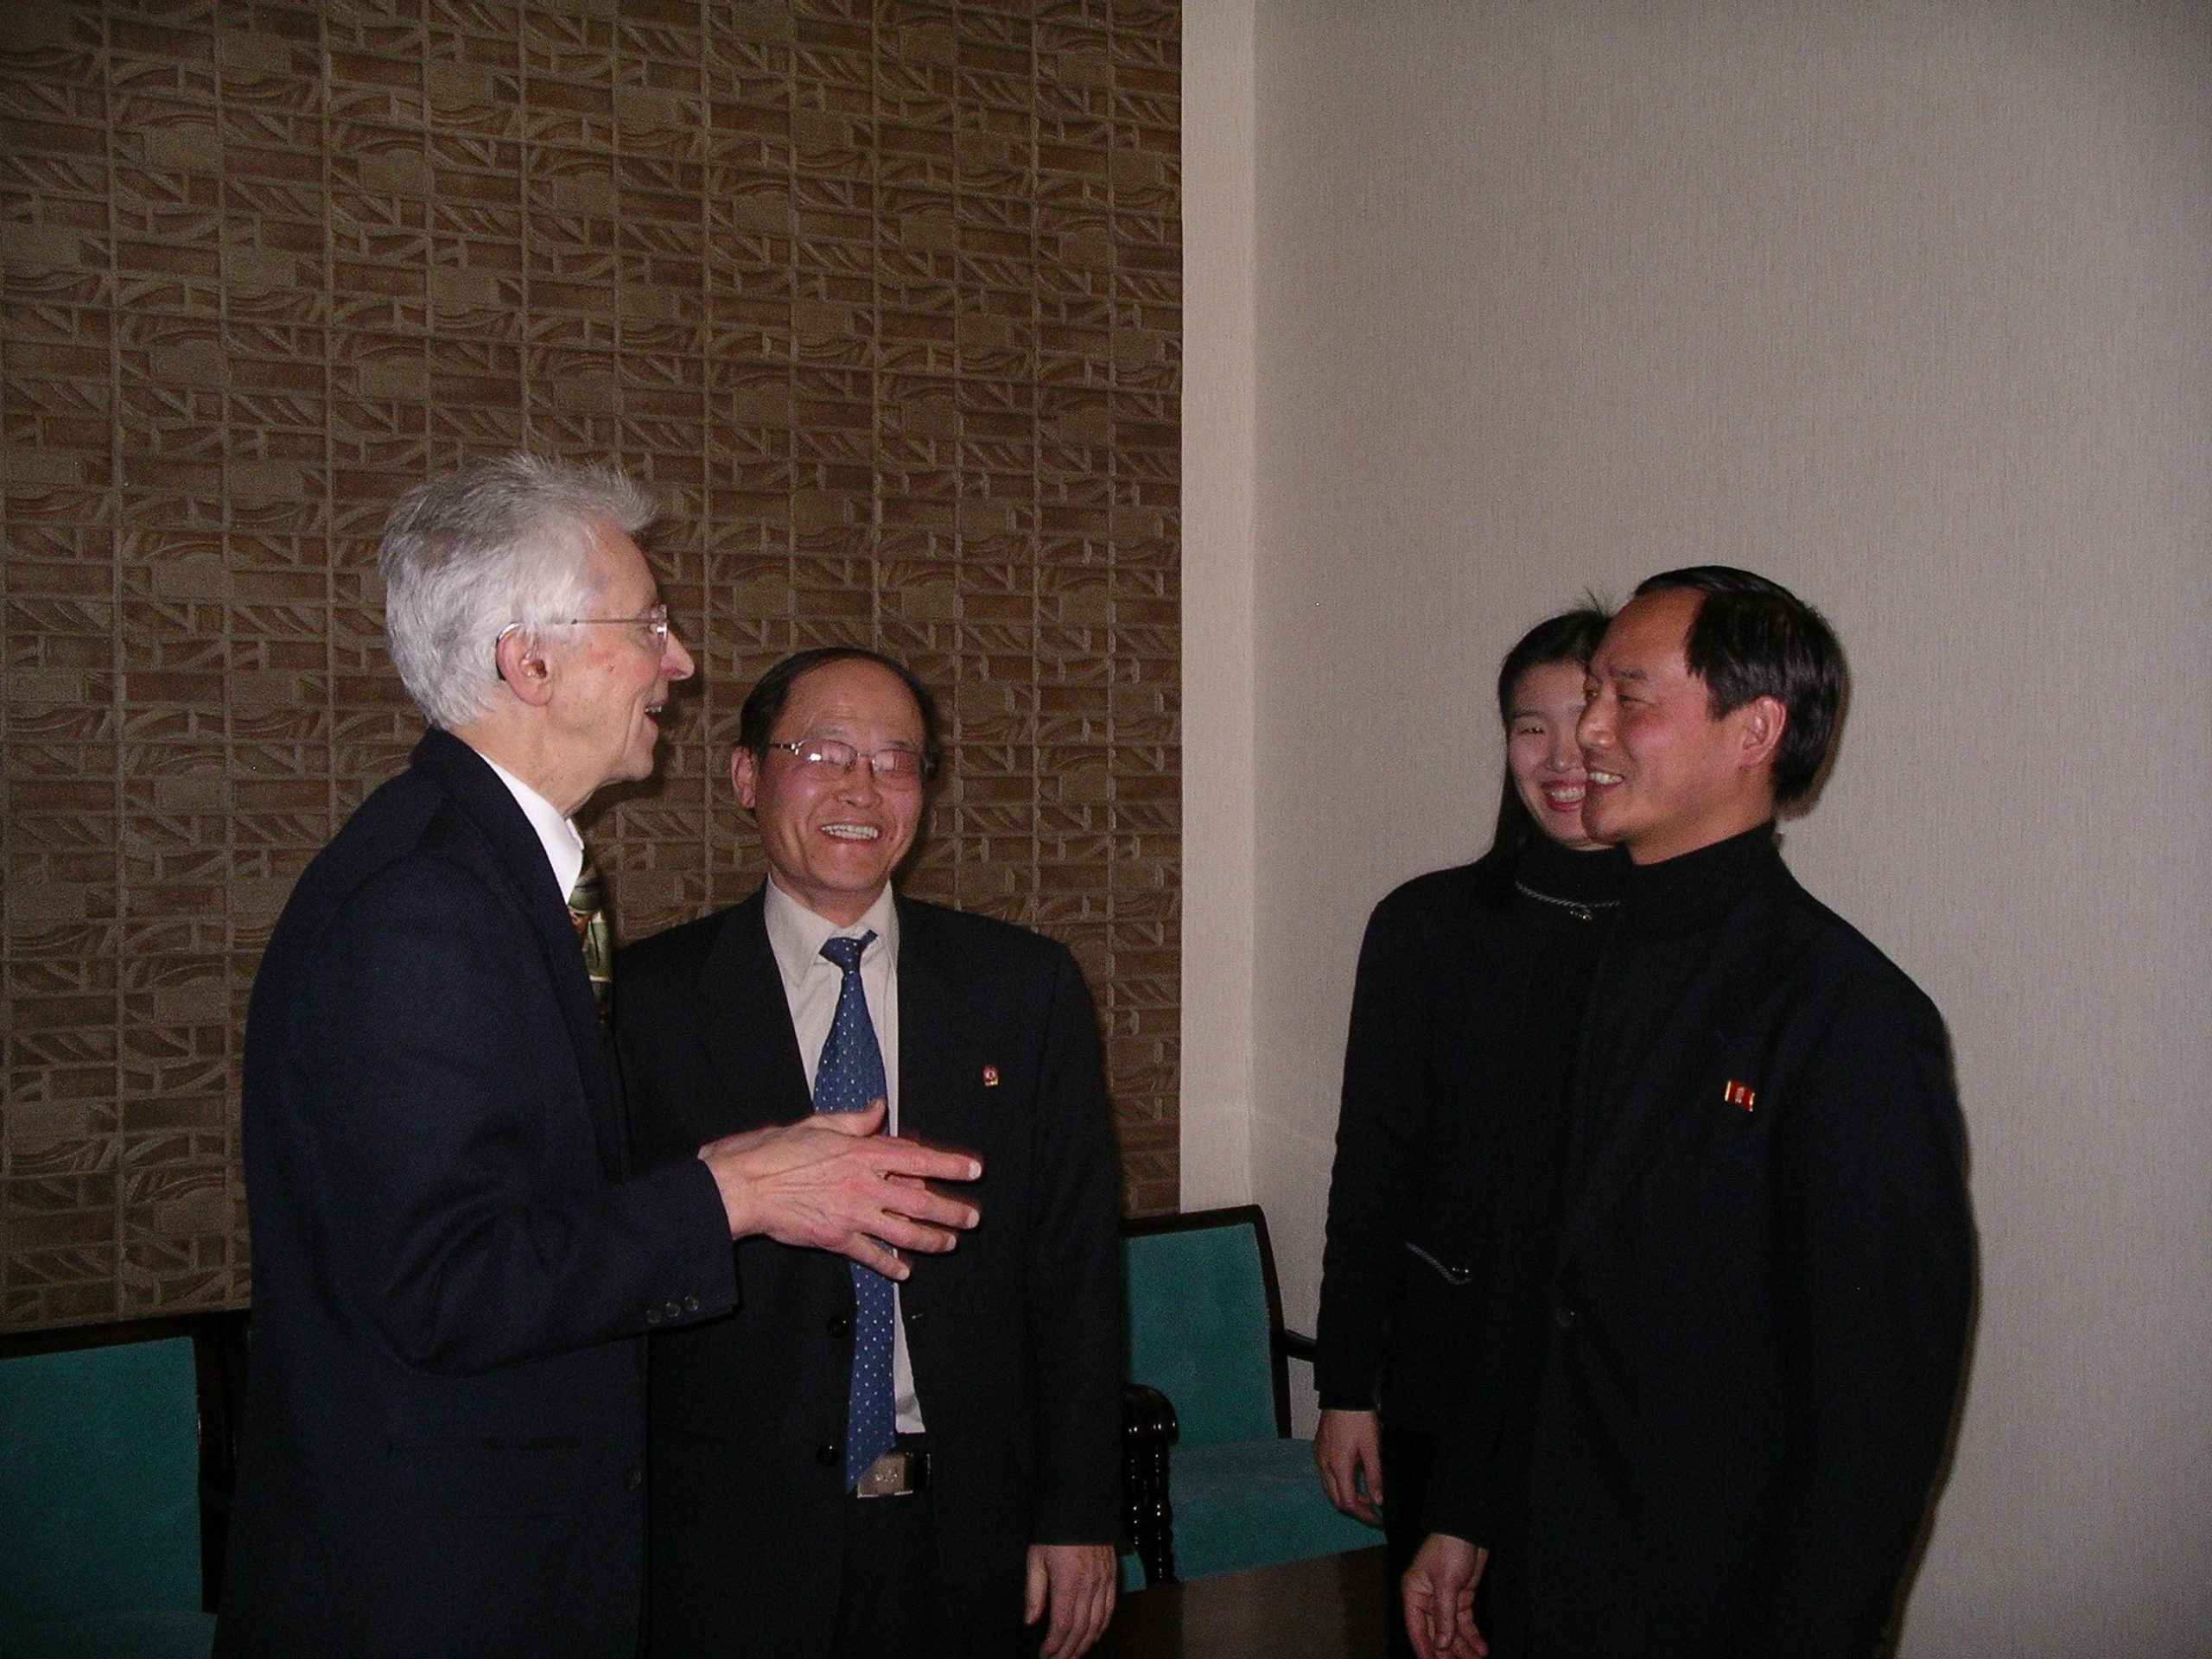 Hecker in lively conversation with Korean officials facing each other in a small circle